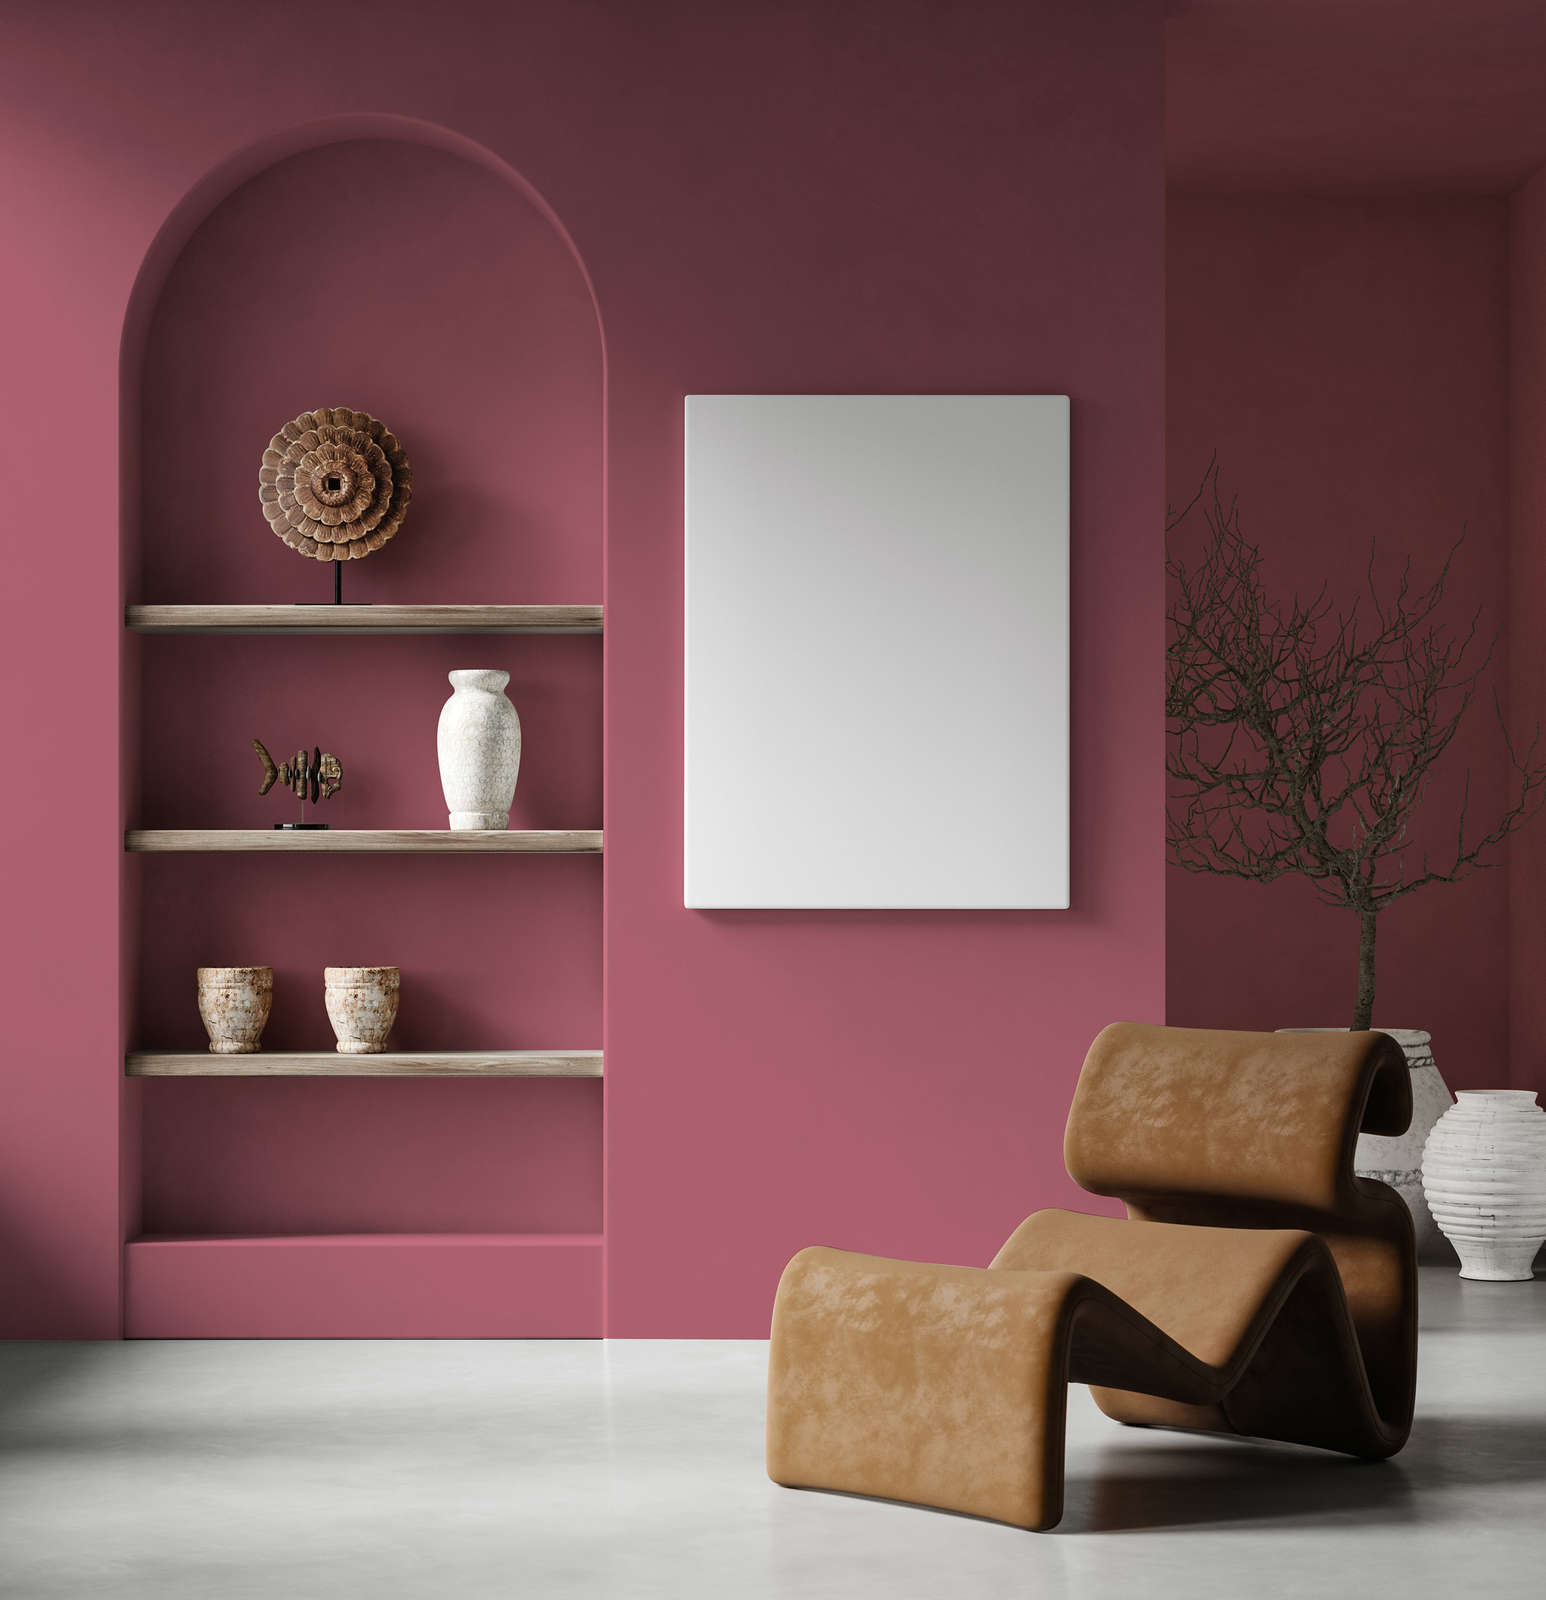             Premium Wall Paint Refreshing Dark Pink »Blooming Blossom« NW1018 – 5 litre
        